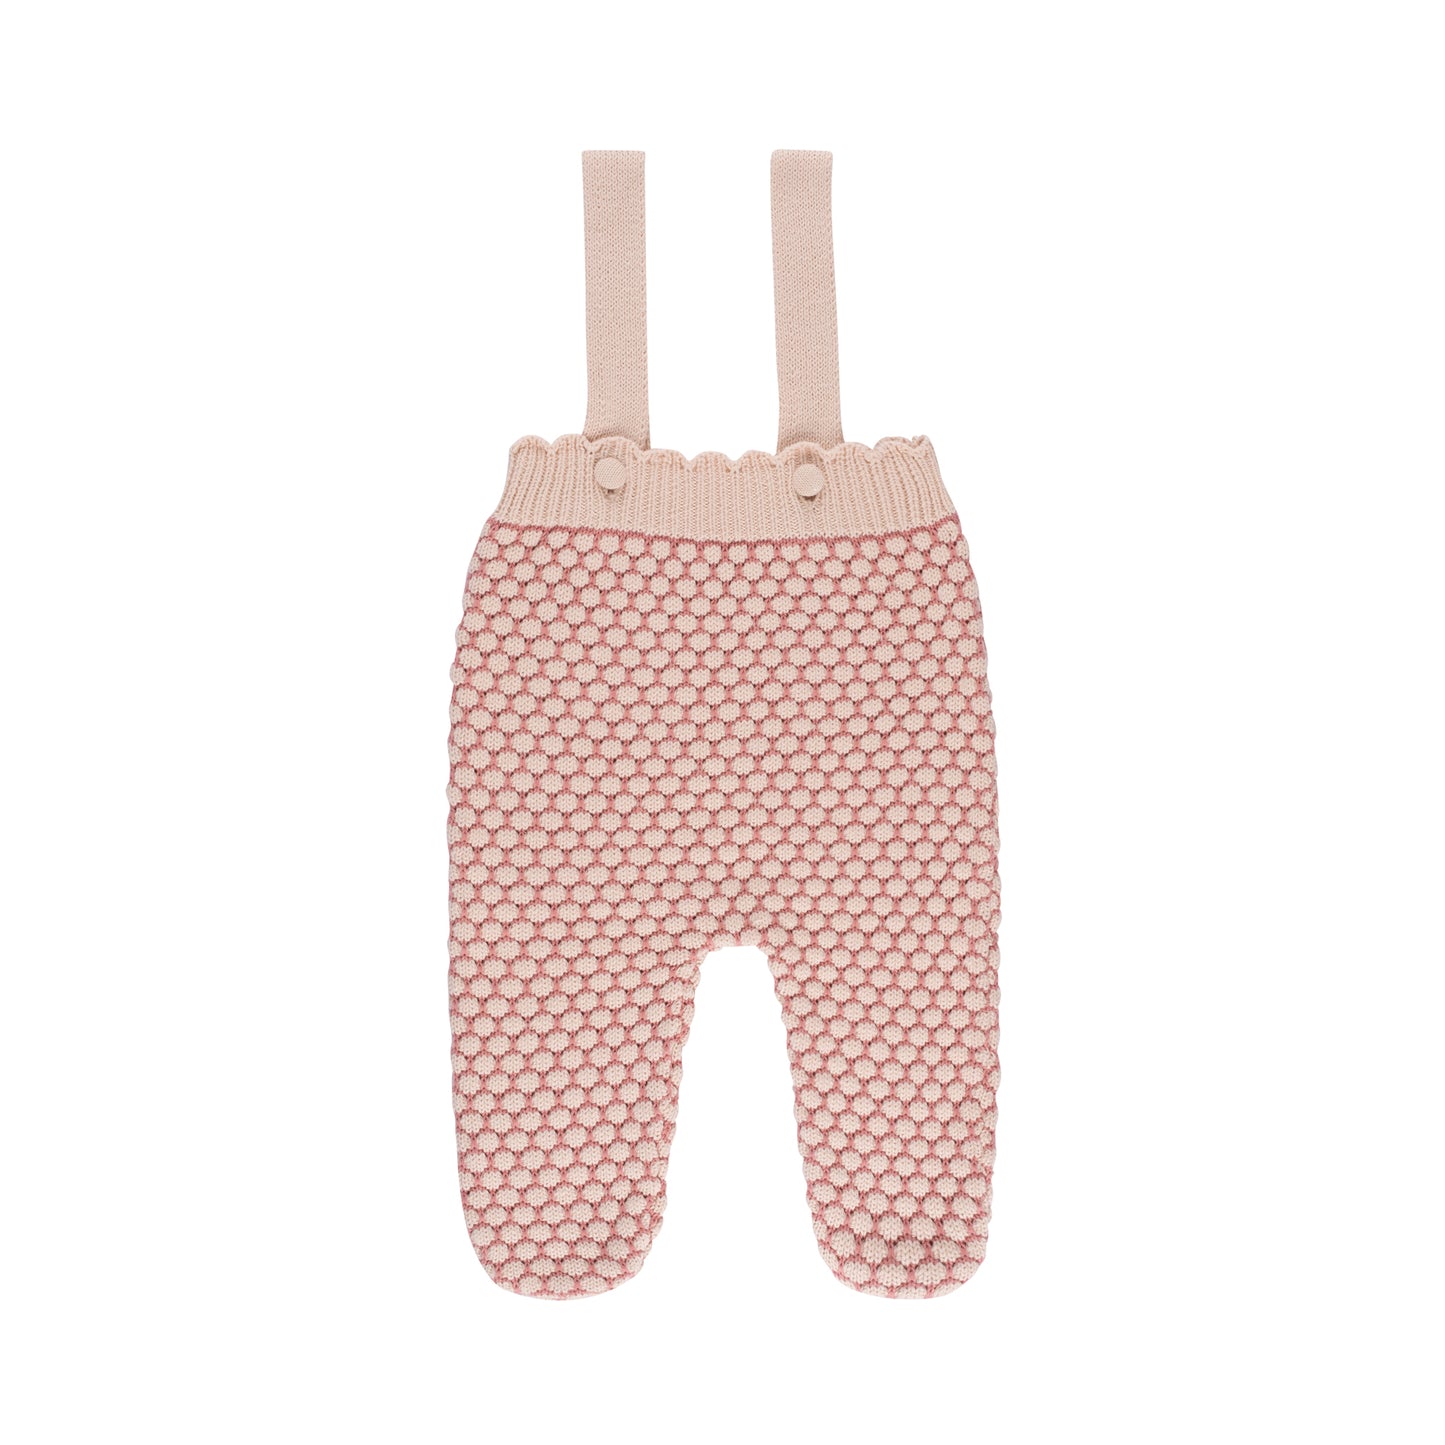 Ely's & Co. Popcorn Knit Overalls